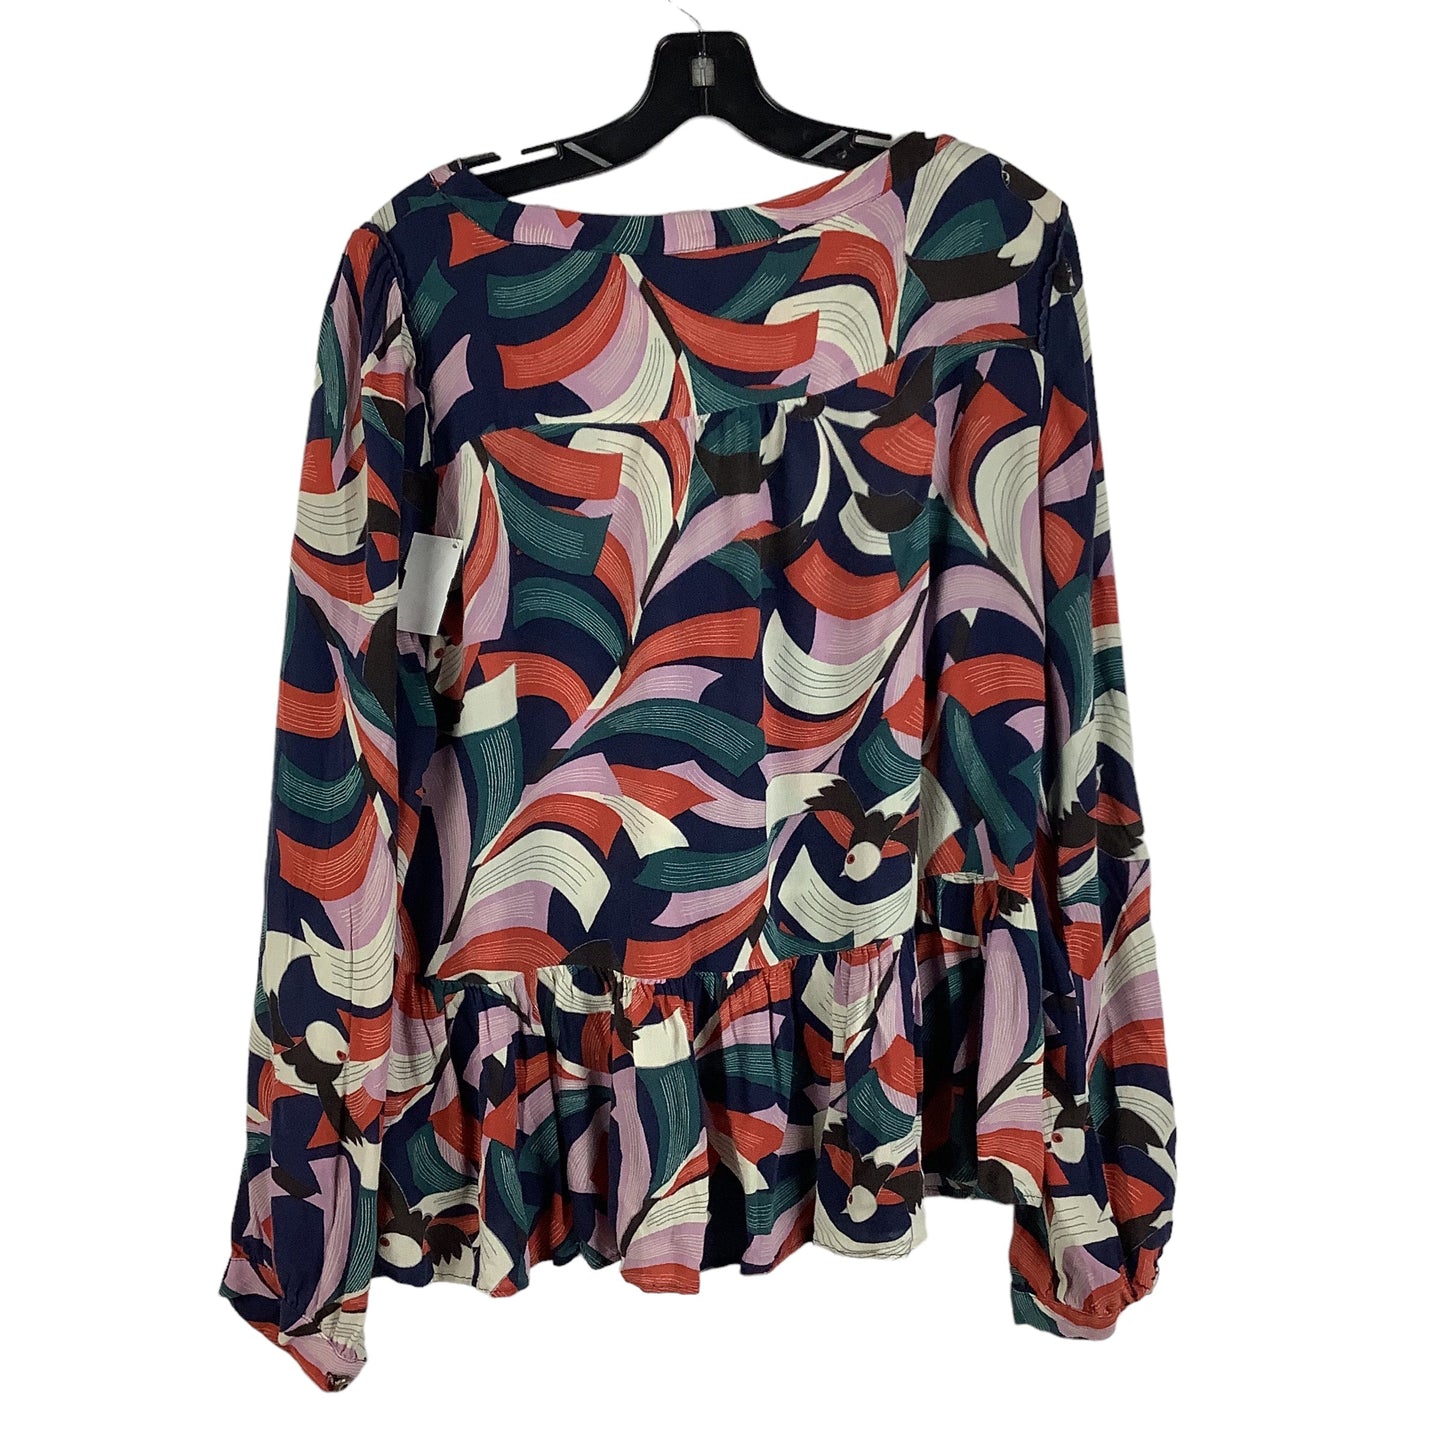 Multi-colored Top Long Sleeve Maeve, Size Xl